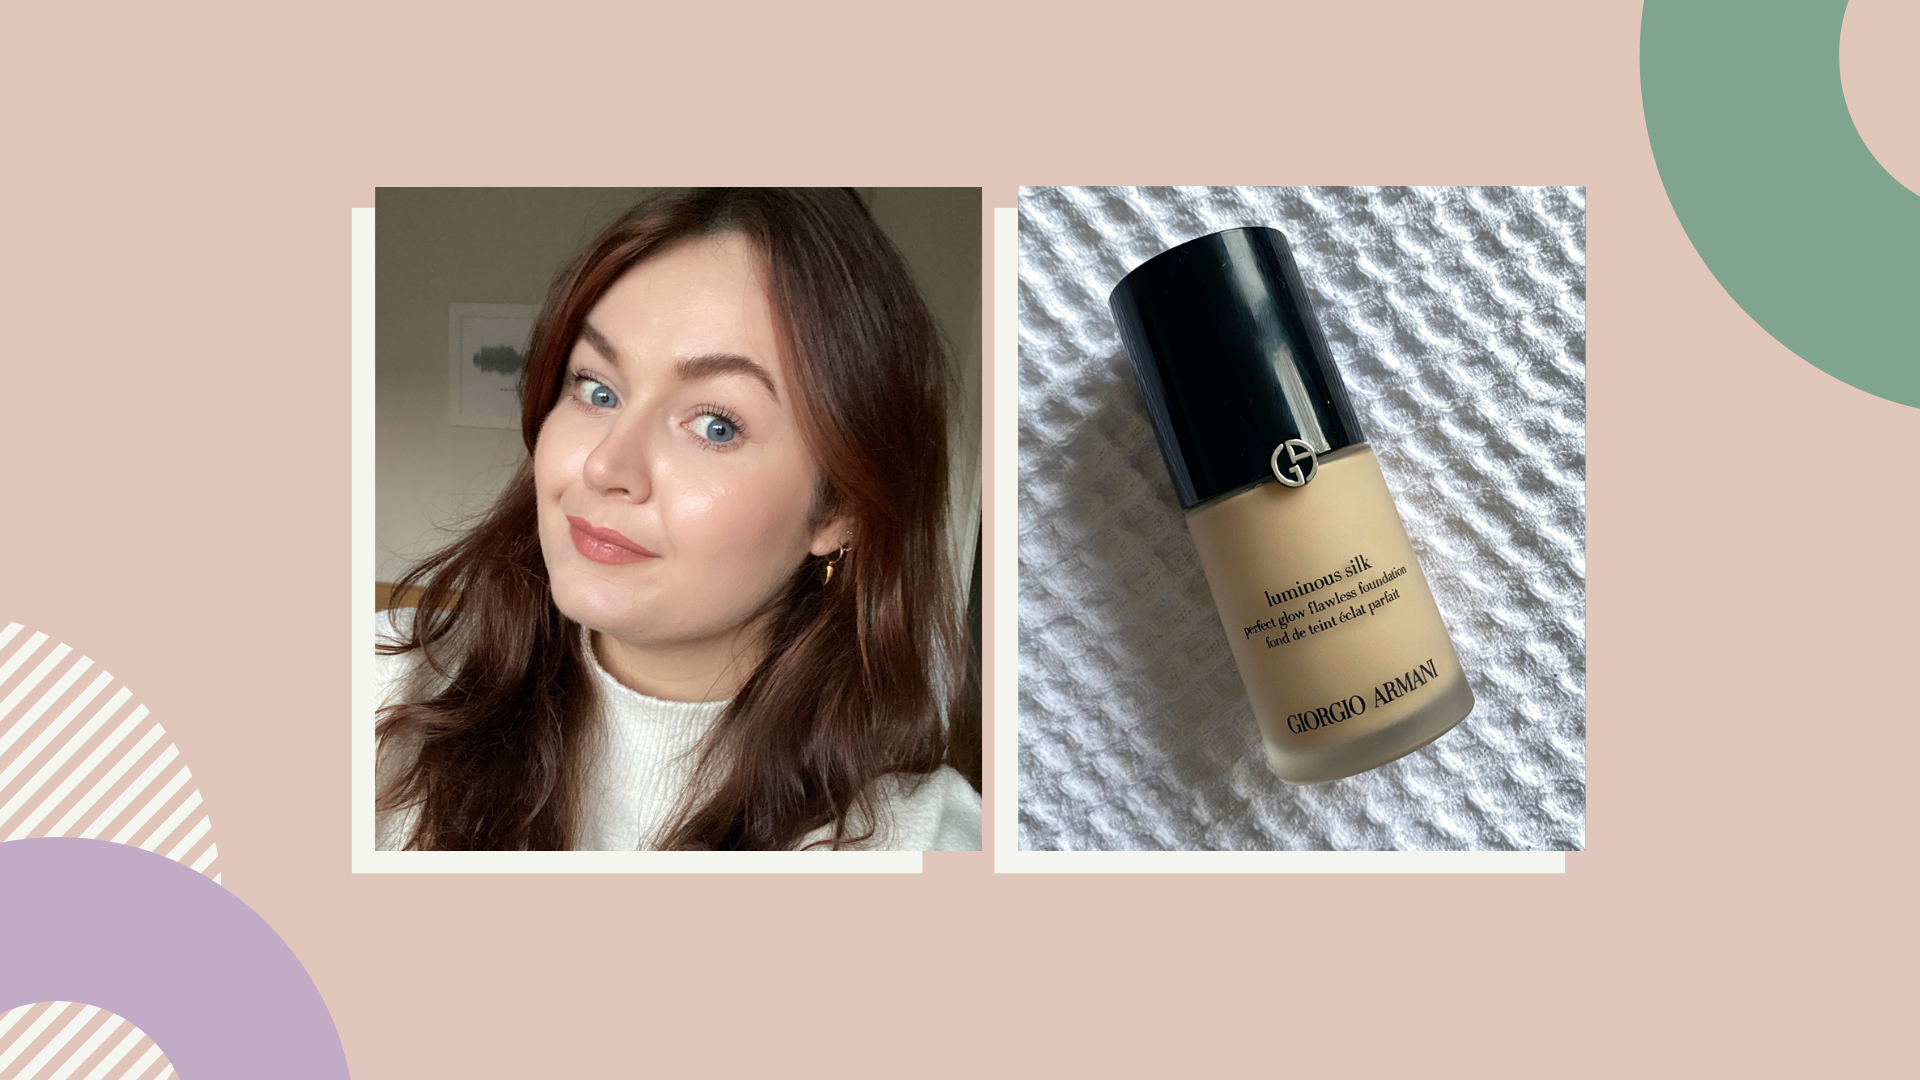 Giorgio Armani Luminous Silk Foundation review: a must-try | Woman & Home